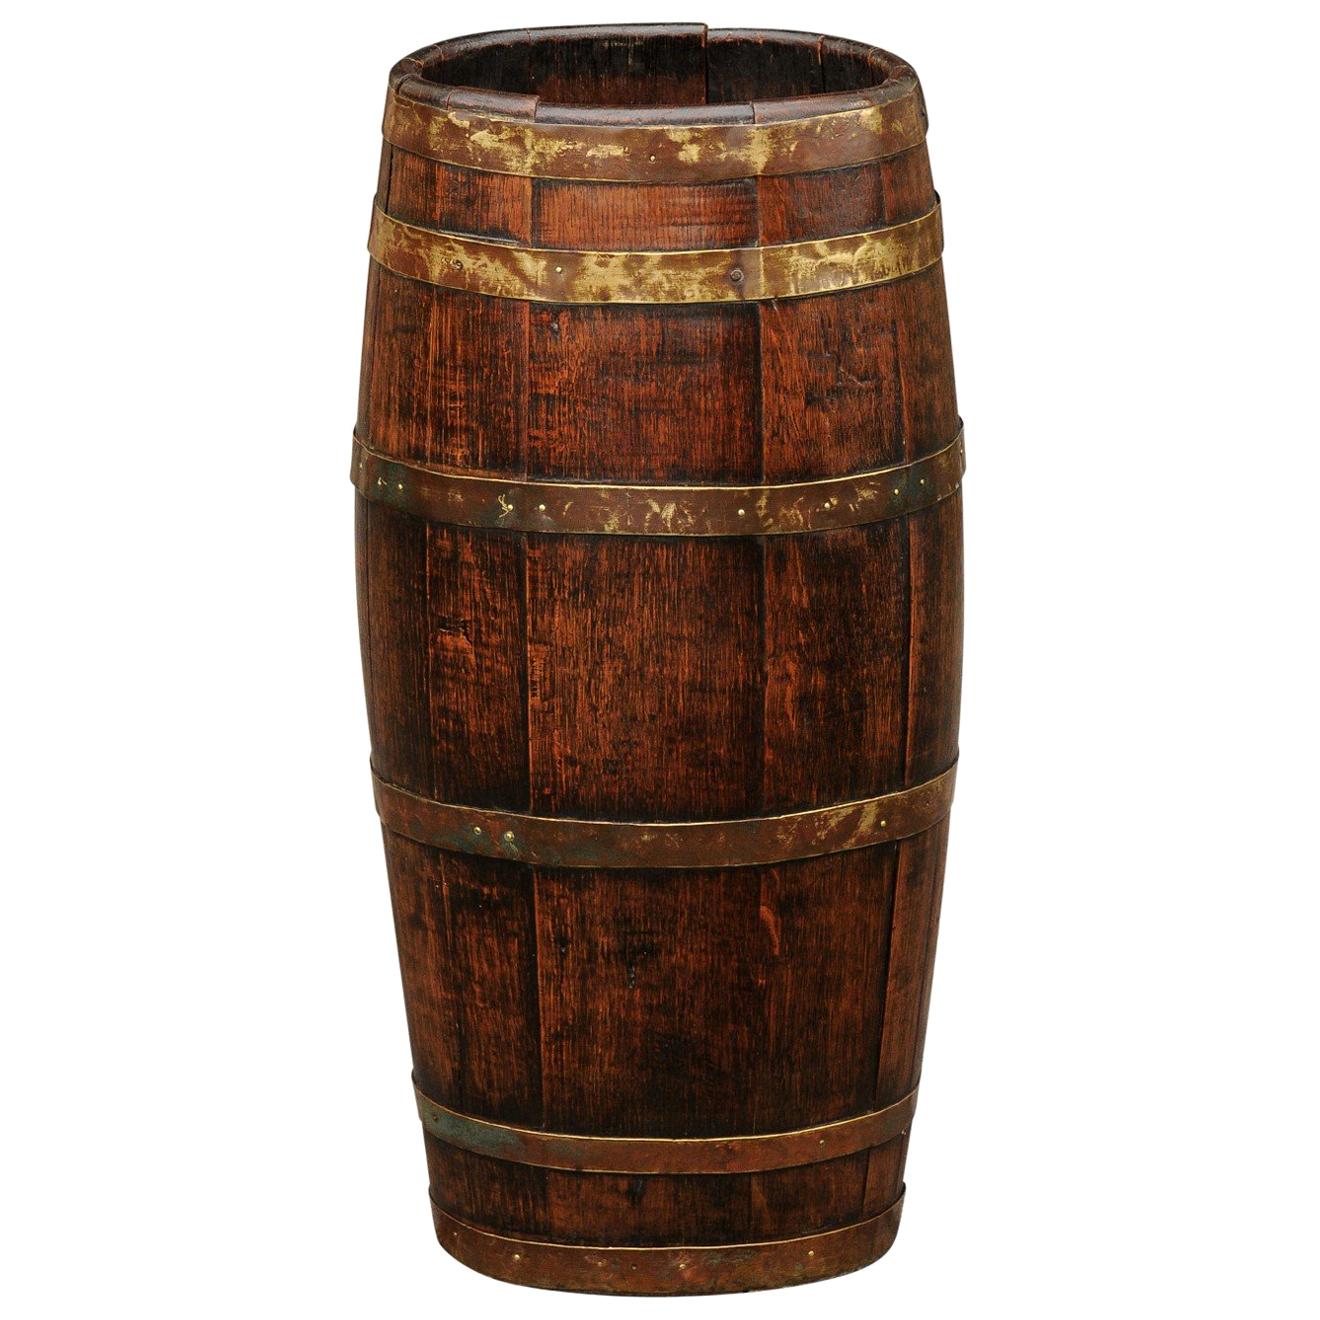 English Slender Rustic Oak Barrel with Brass Braces from the Turn of the Century